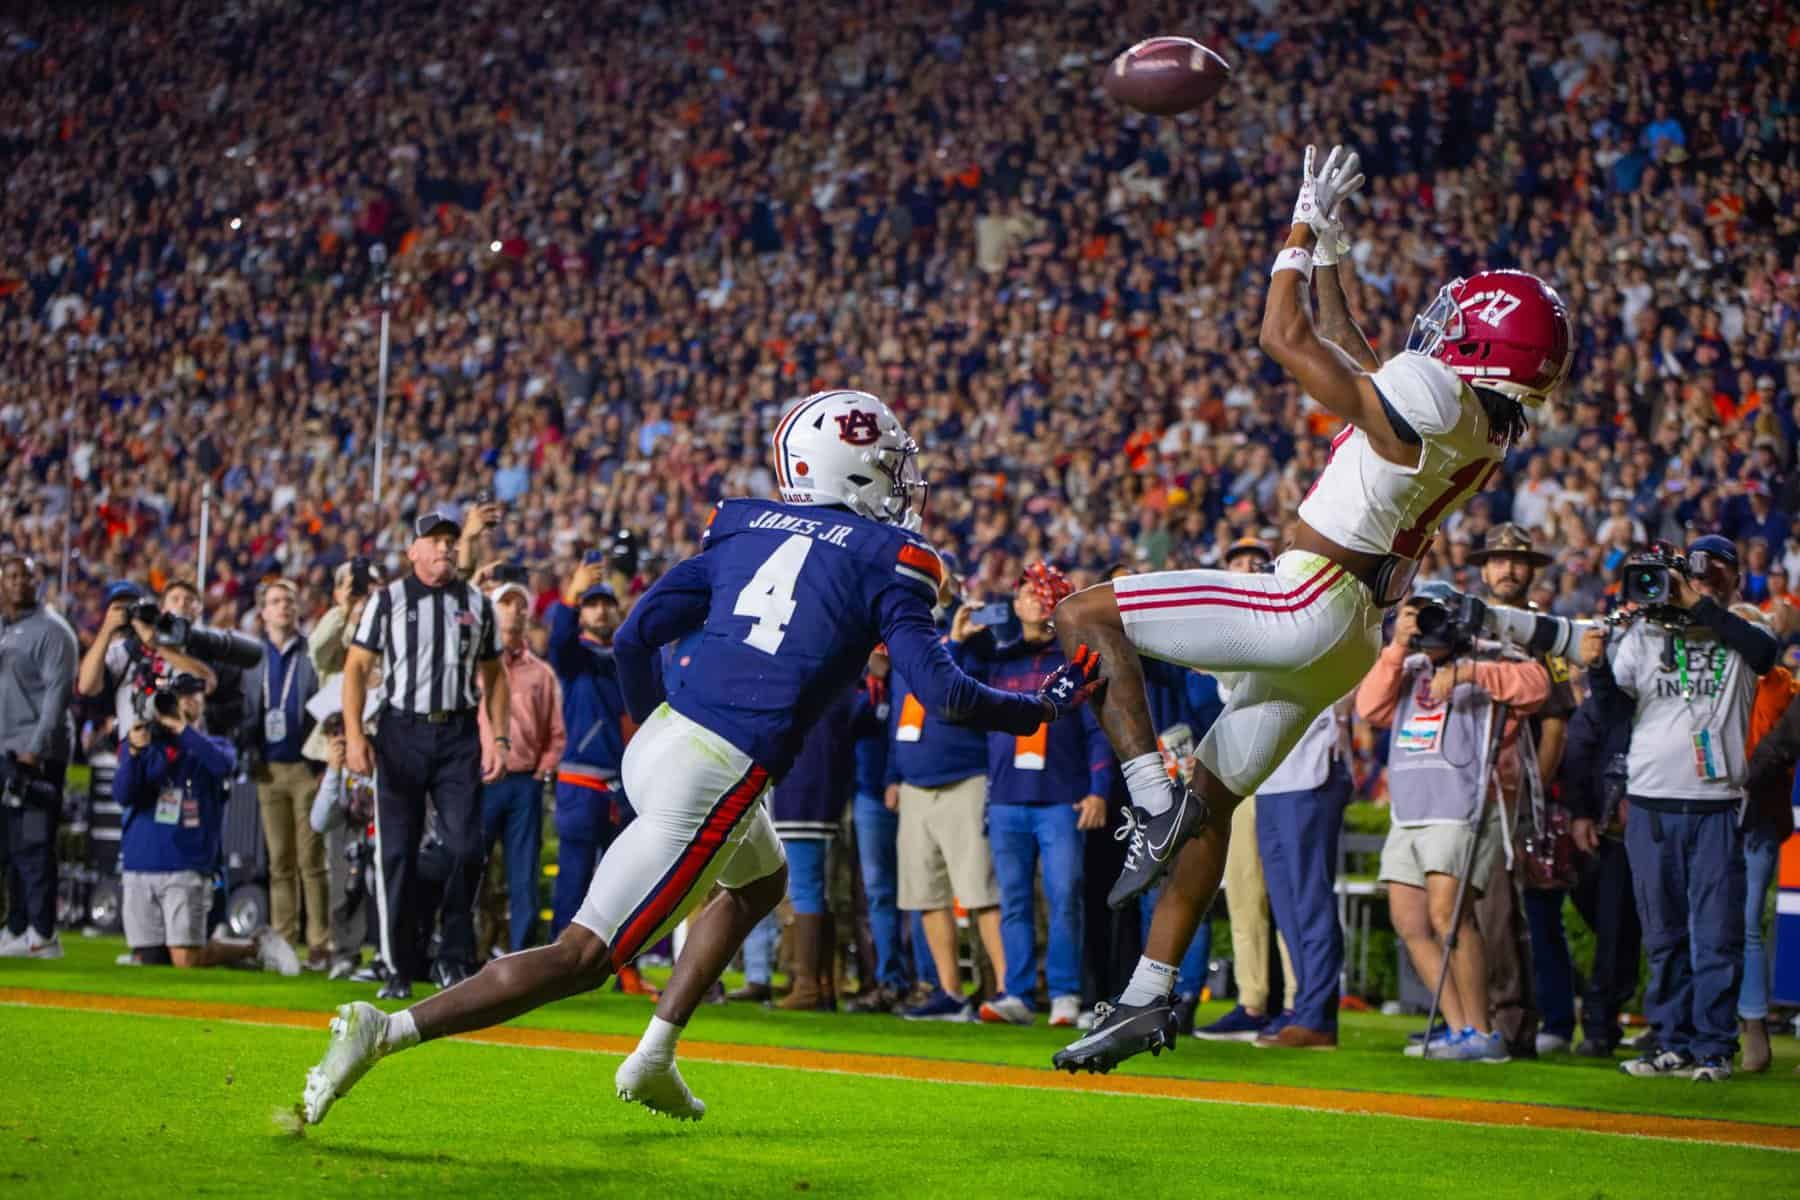 Miracle from Milroe helps No. 8 Alabama Auburn in Iron Bowl